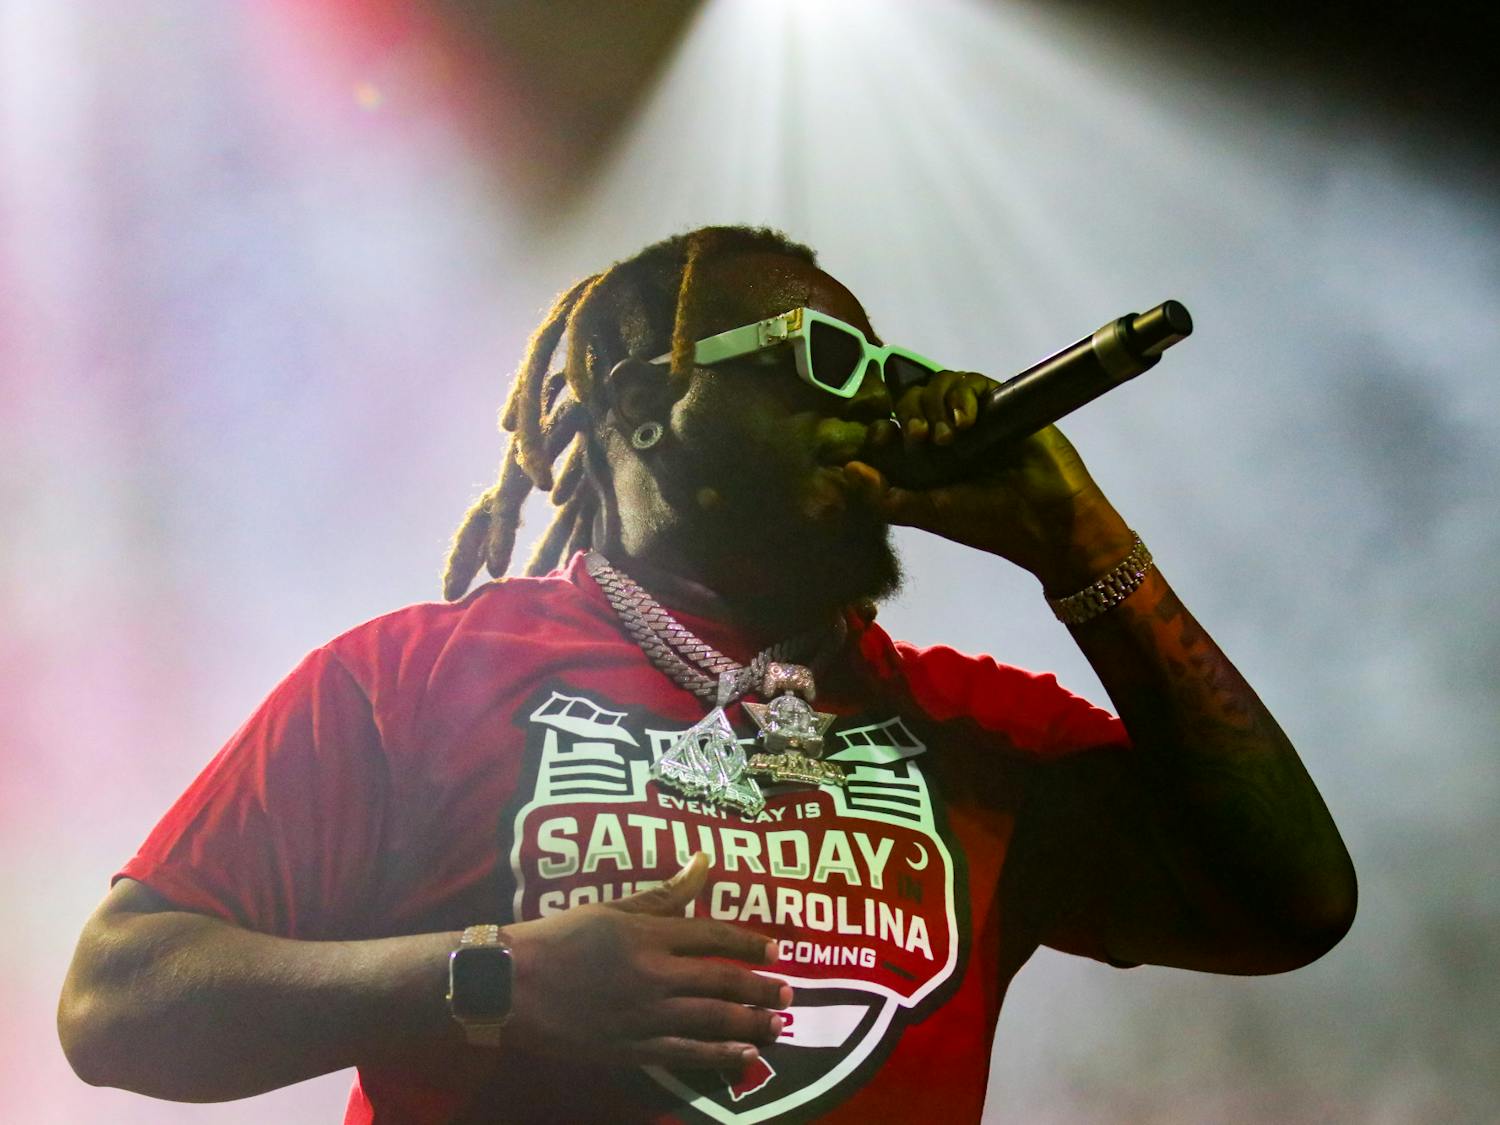 T-Pain performing at Cockstock on Oct. 21, 2022. He performed hits like “Bartender” to the sold out crowd at Colonial Life Arena.